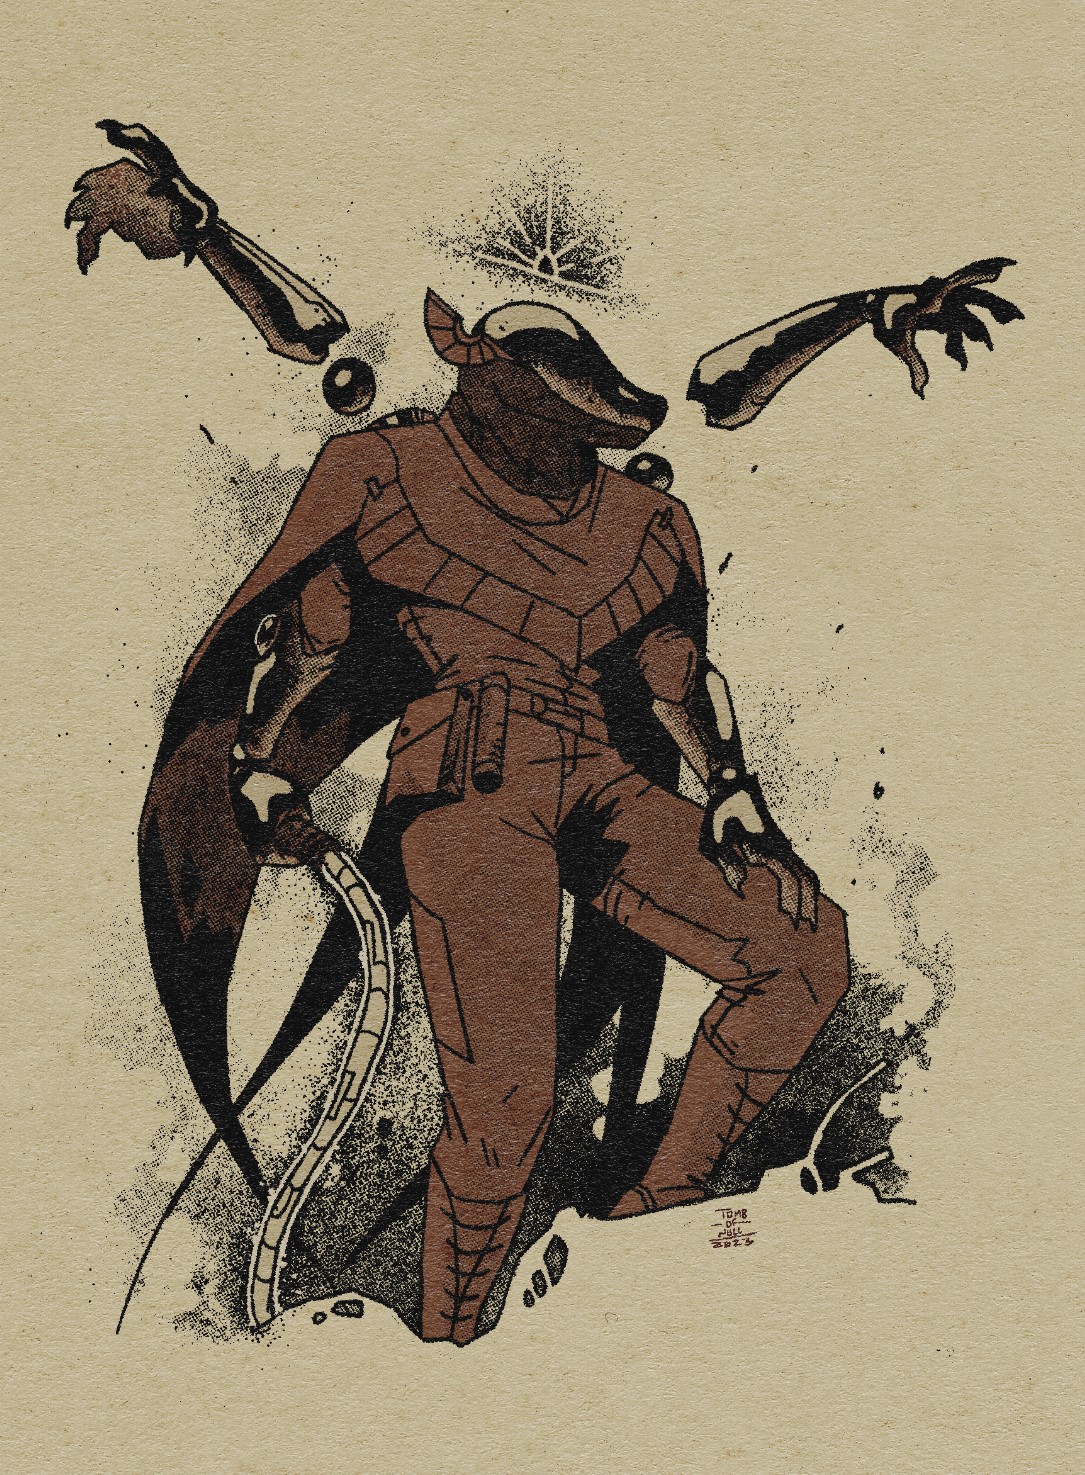 An ominous figure in a maroon outfit. The outfit consists of a glossy mask, a cape, shirt and pants, a utility belt, metallic gauntlets, and two floating metal arms to the right and left of the figure. In his hand is a whip-like device. Above his head is a horizon-like symbol.